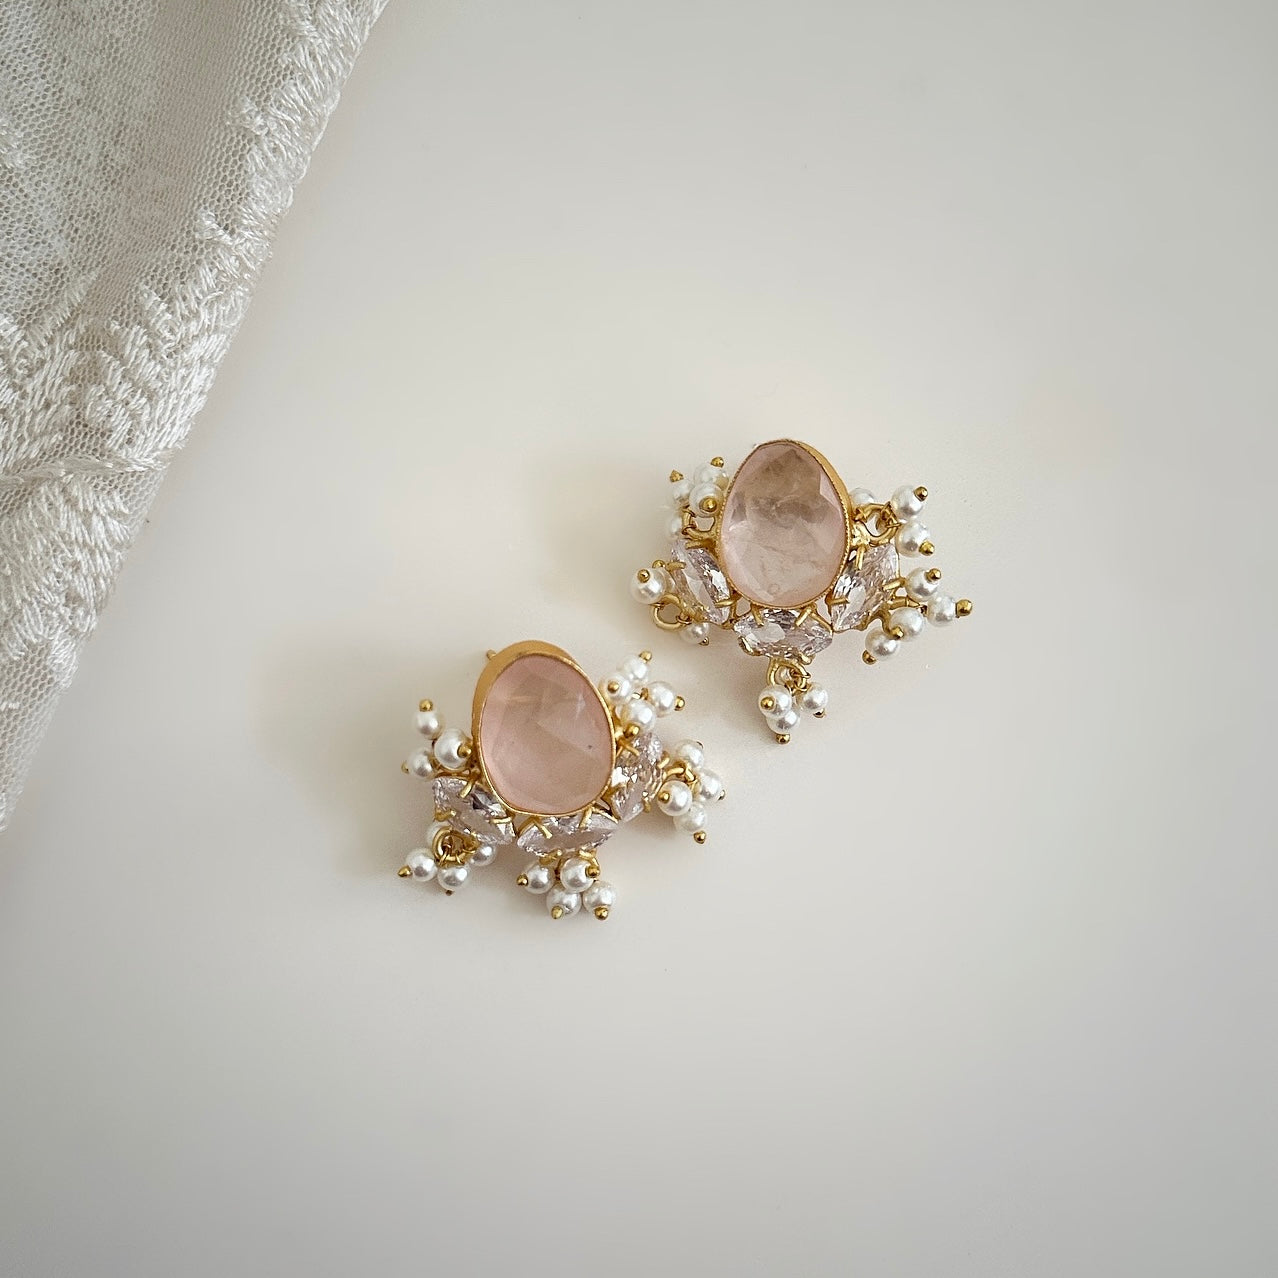 Add a touch of sparkle and elegance with our Classic Rose Stud Earrings. Made with rose quartz and cz crystals, these earrings are sure to shine and make a statement. Perfect for any occasion, these earrings will add a touch of glamour to any outfit. Earring drop 3x3cm